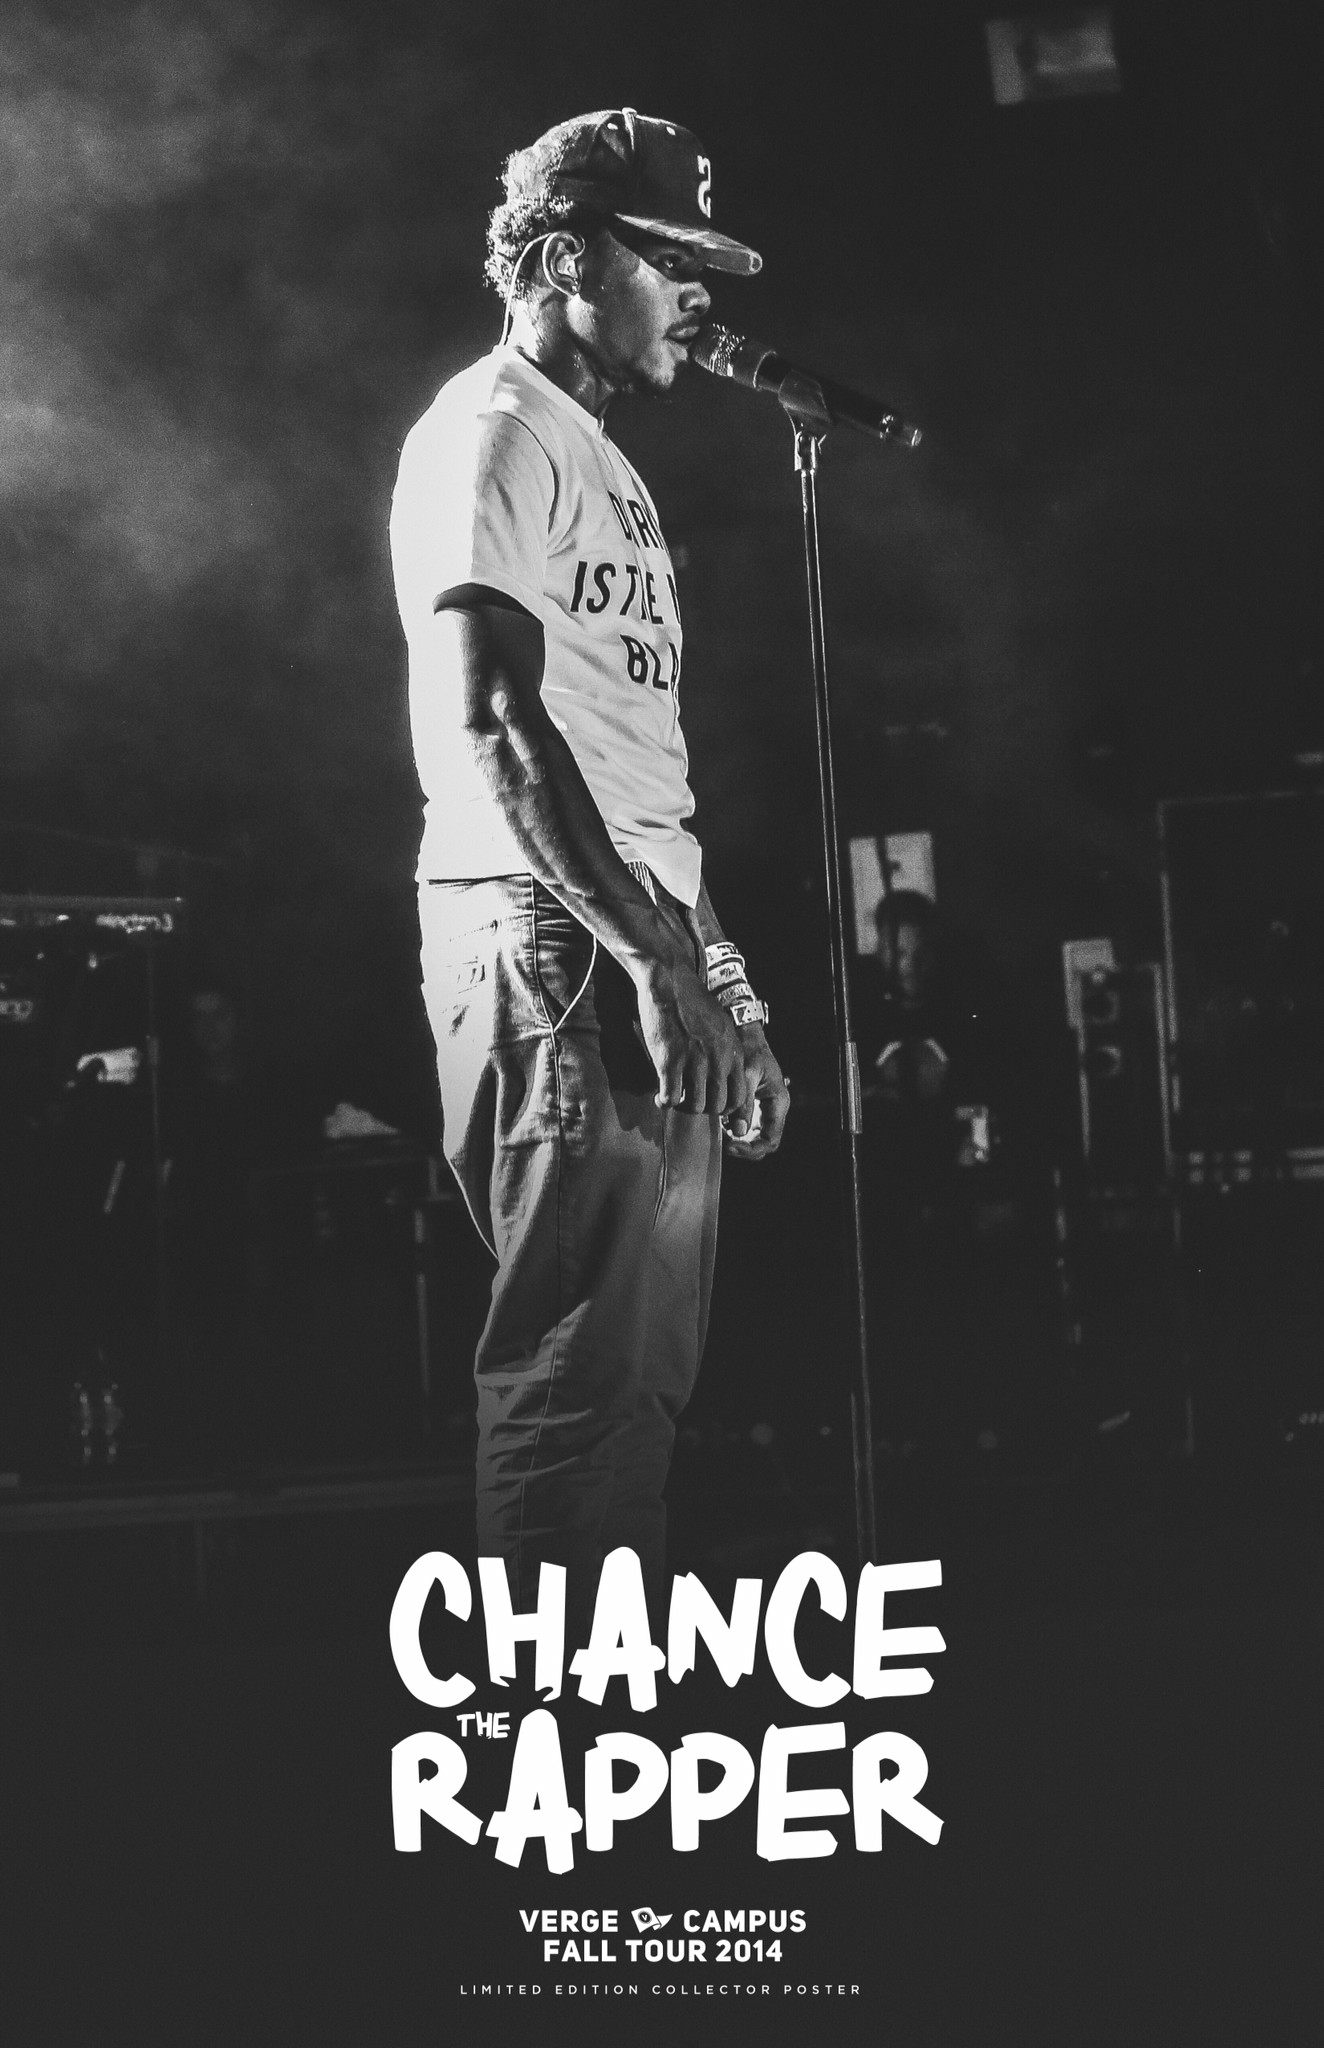 Verge Campus Tour Promotional Poster - Chance The Rapper Concert - HD Wallpaper 